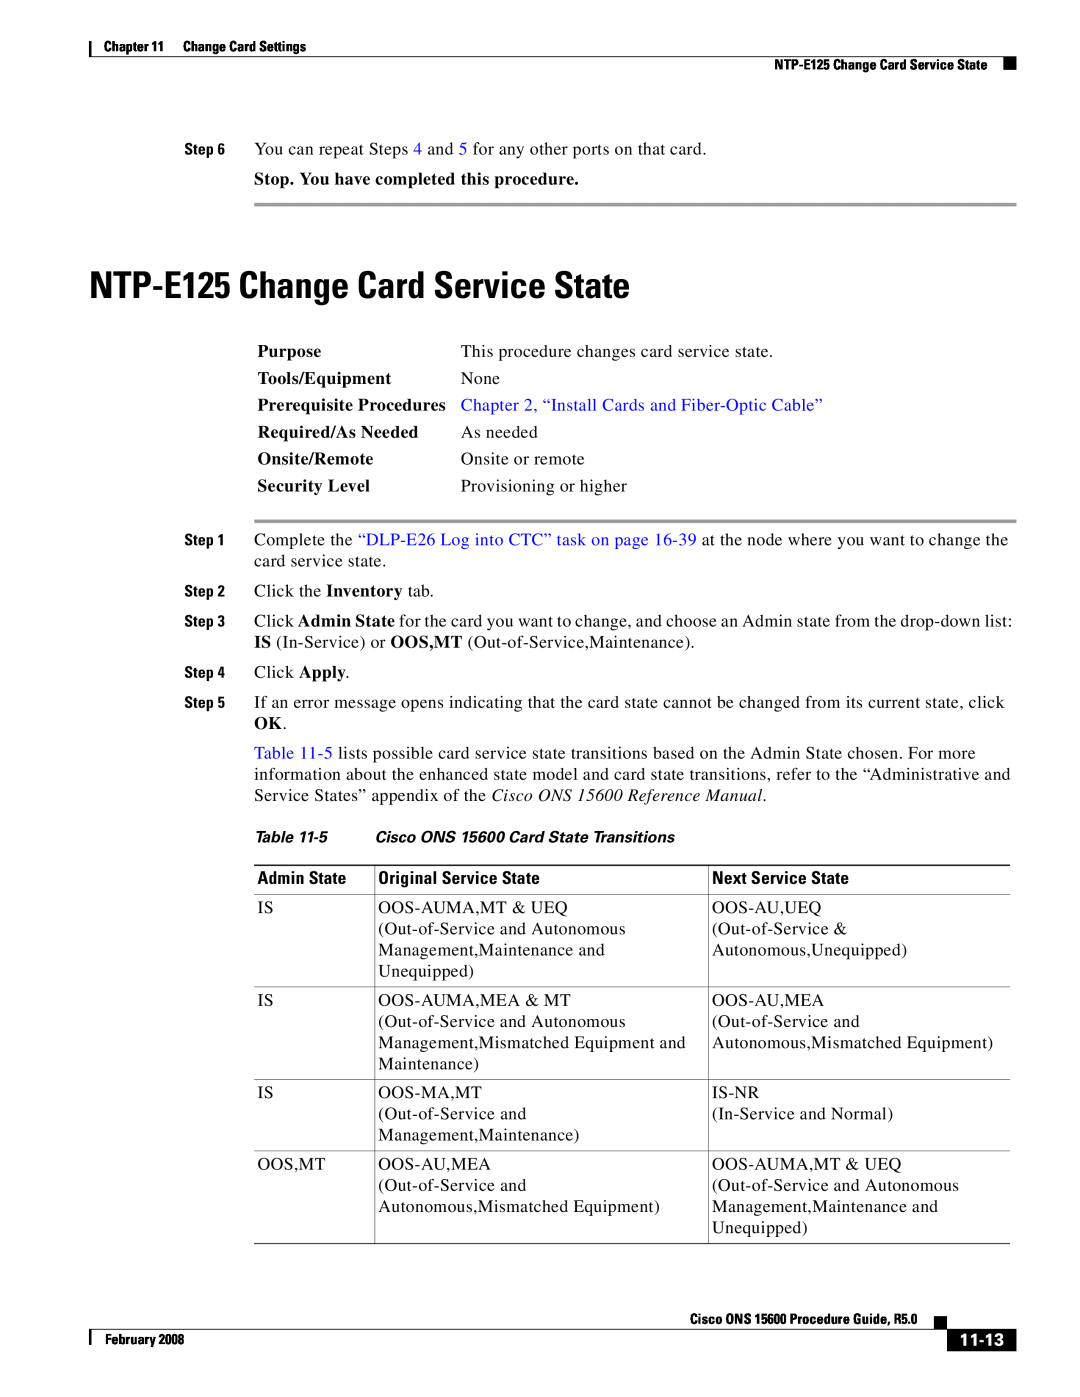 Cisco Systems ONS 15600 NTP-E125 Change Card Service State, This procedure changes card service state, Admin State, 11-13 